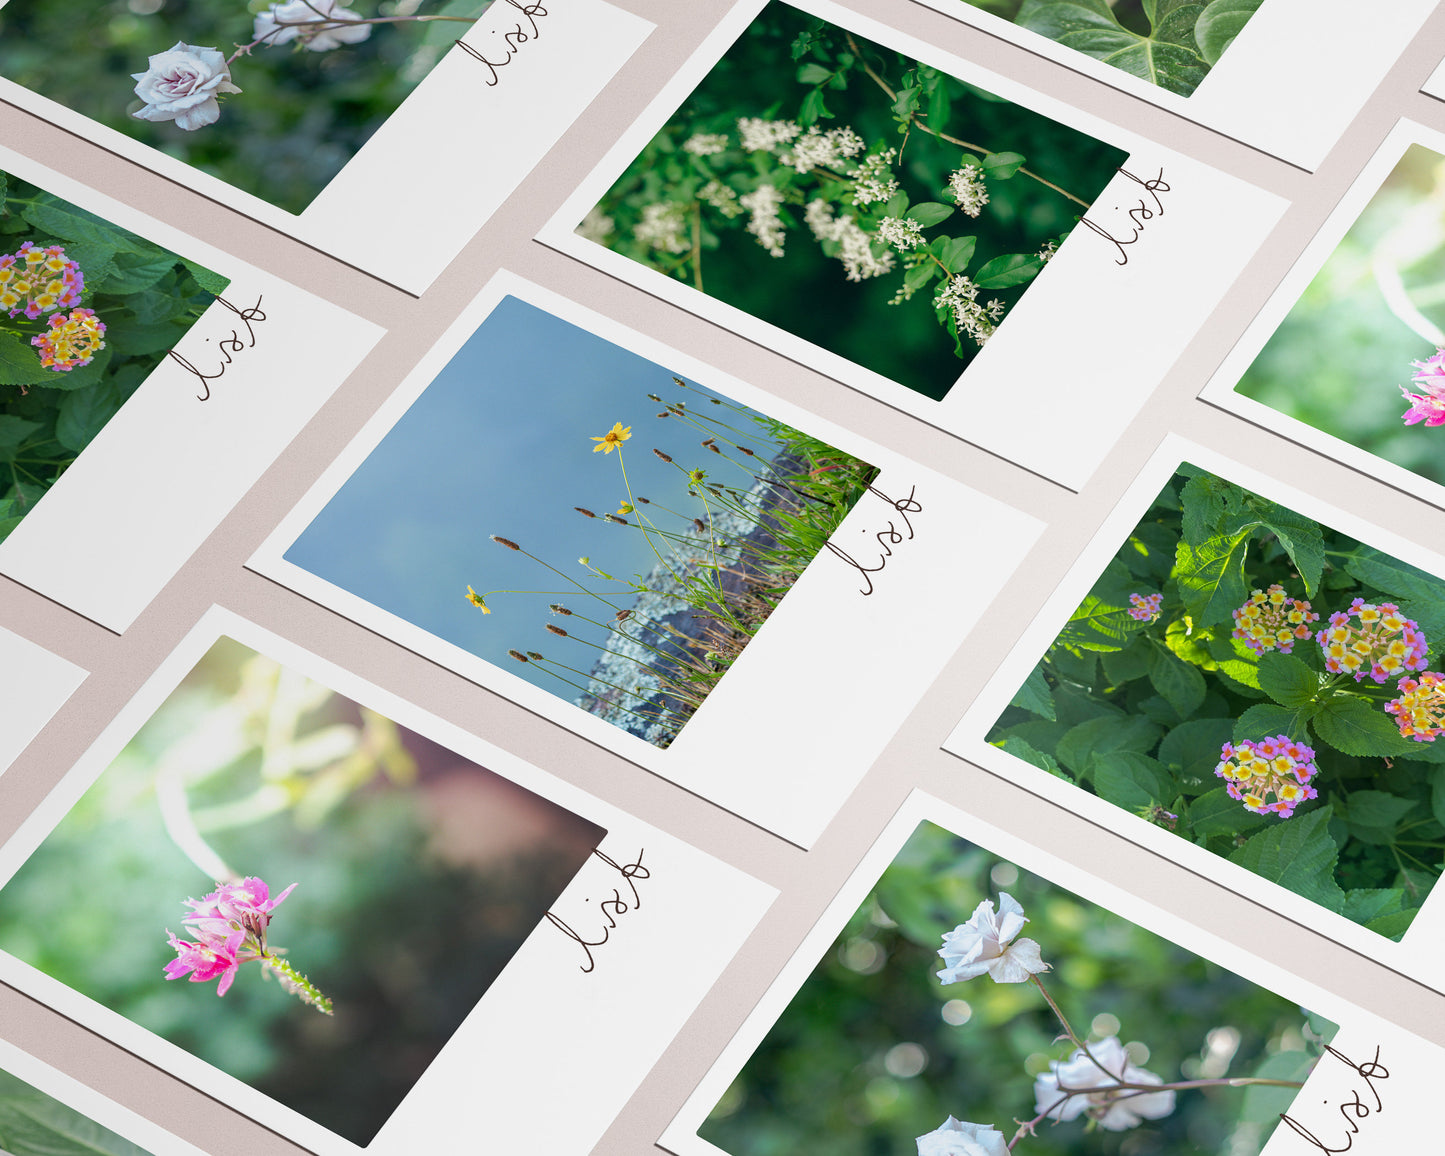 Floral Photography Note Cards Variety Pack